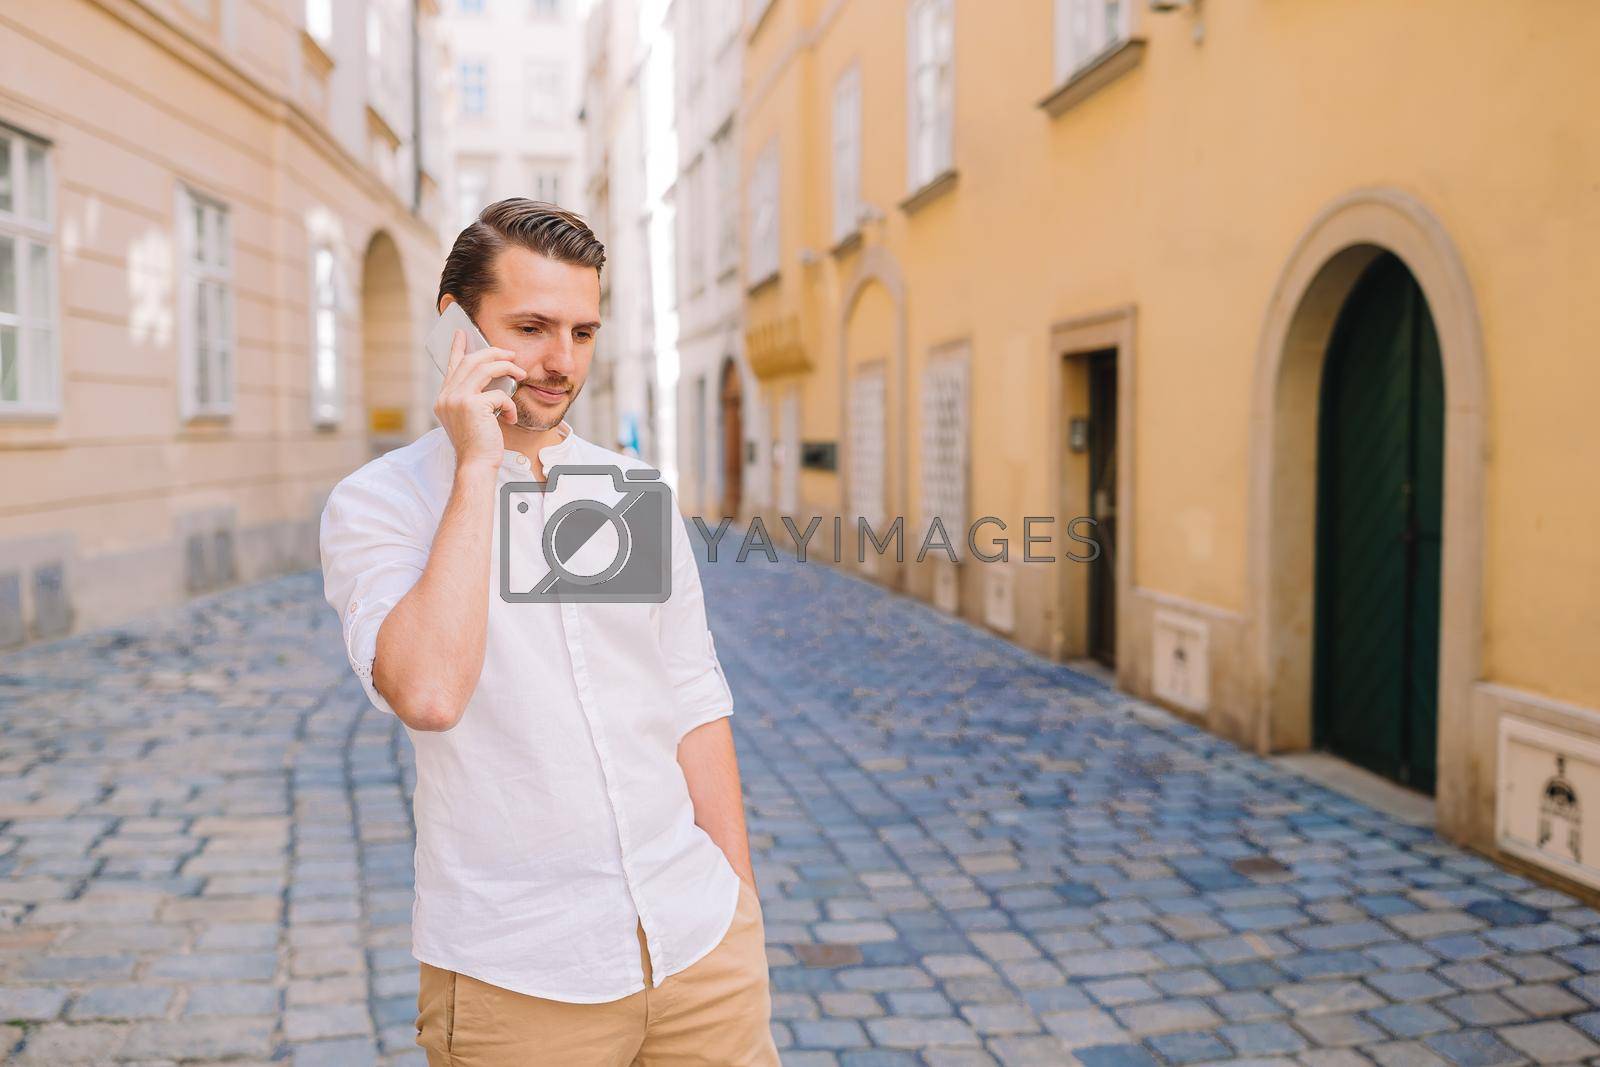 Royalty free image of Young man background the old european city take selfie by travnikovstudio